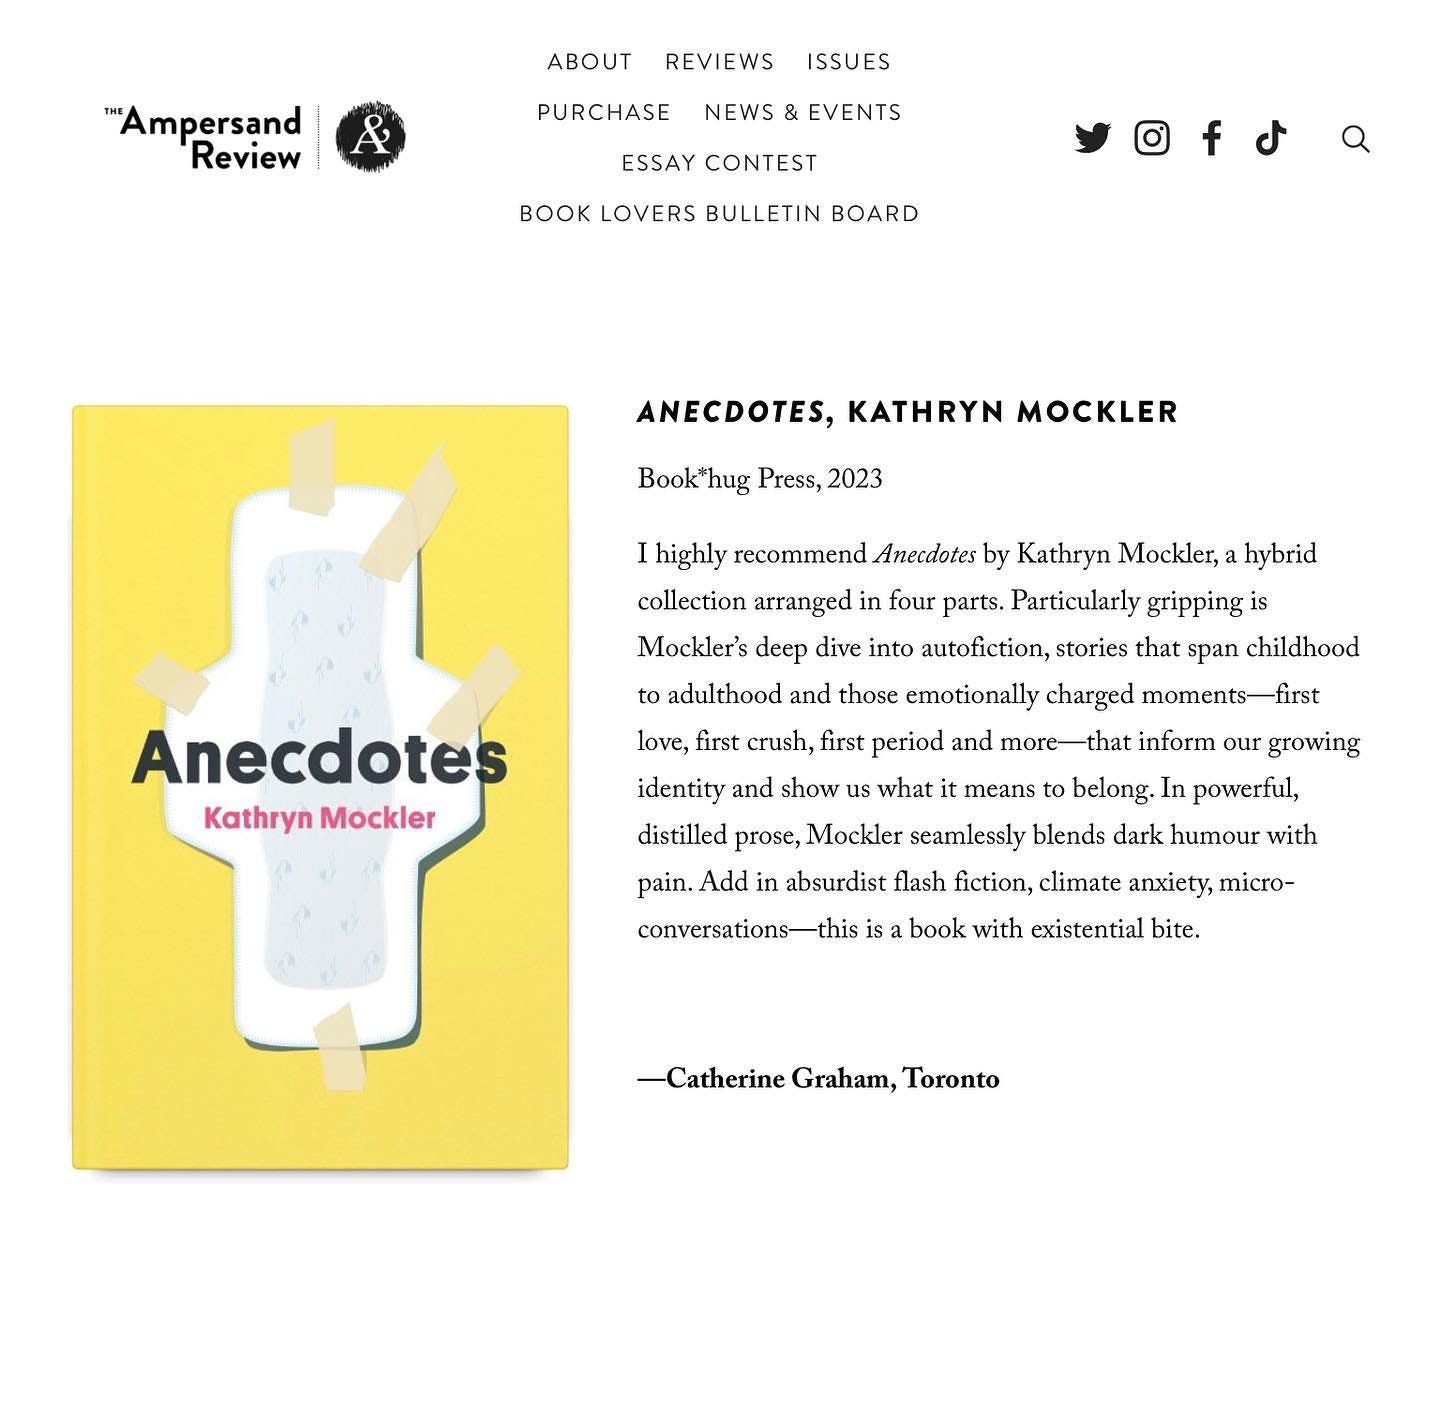  I highly recommend Anecdotes by Kathryn Mockler, a hybrid collection arranged in four parts. Particularly gripping is Mockler’s deep dive into autofiction, stories that span childhood to adulthood and those emotionally charged moments—first love, first crush, first period and more—that inform our growing identity and show us what it means to belong. In powerful, distilled prose, Mockler seamlessly blends dark humour with pain. Add in absurdist flash fiction, climate anxiety, micro-conversations—this is a book with existential bite.